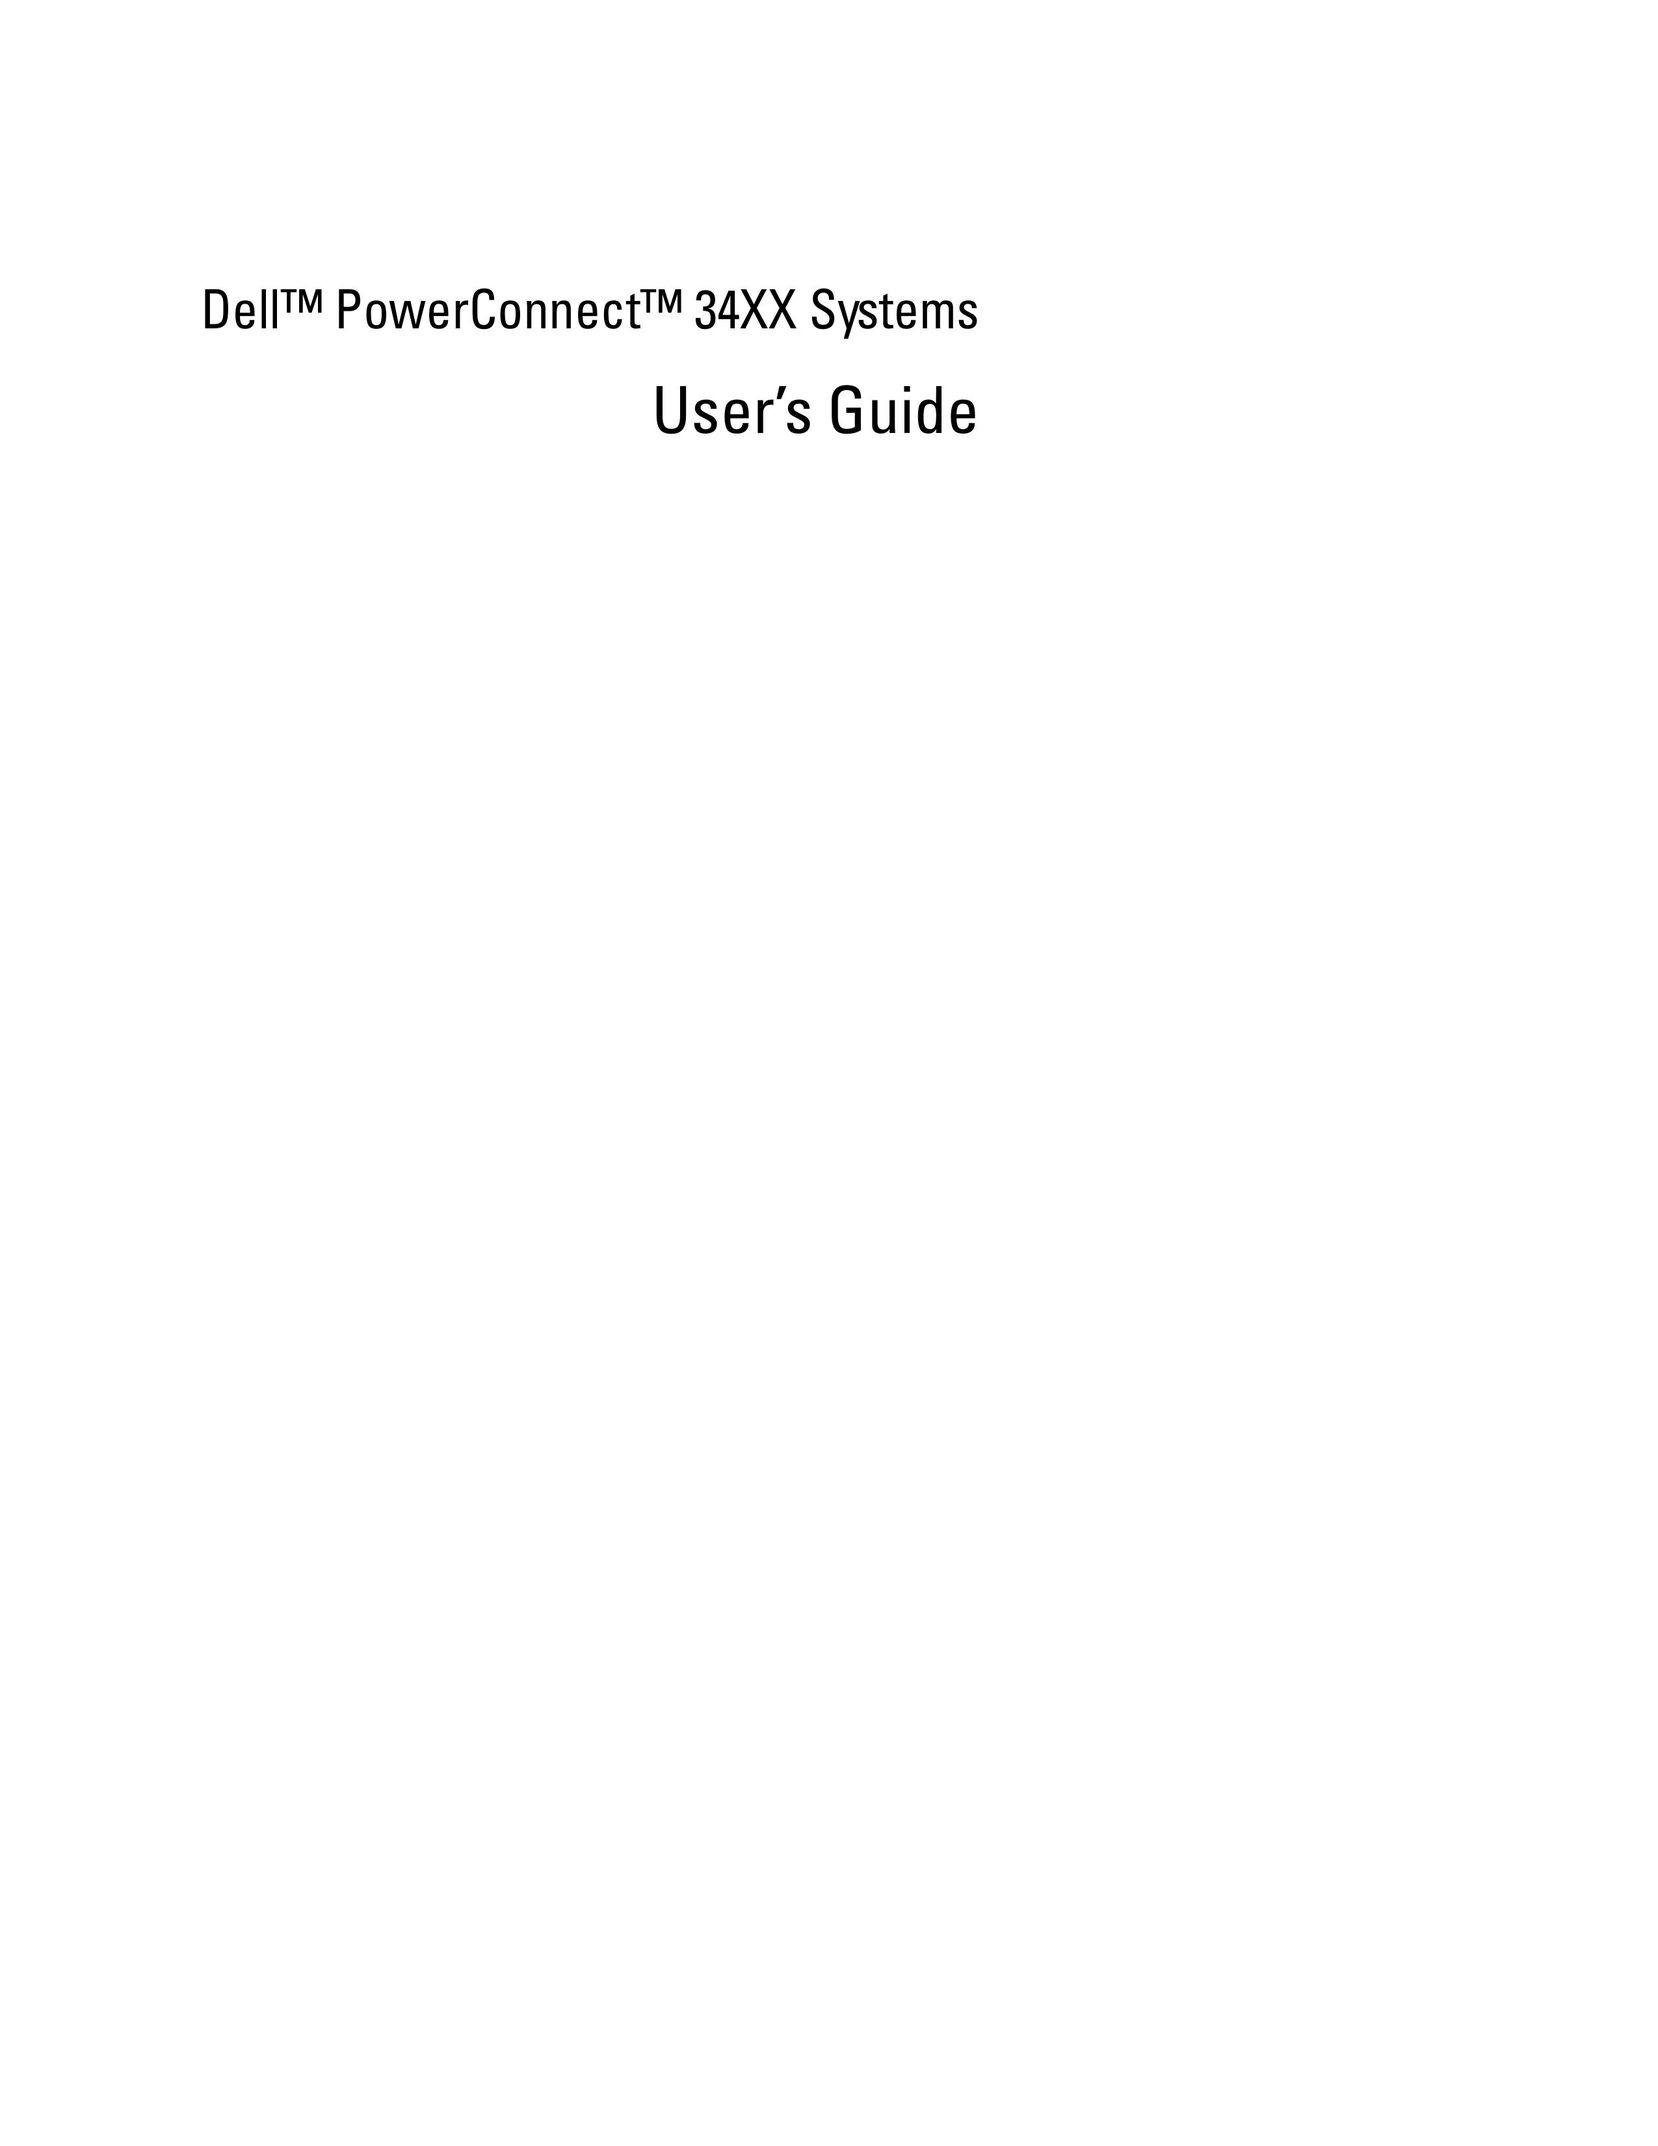 Dell 3424P Switch User Manual